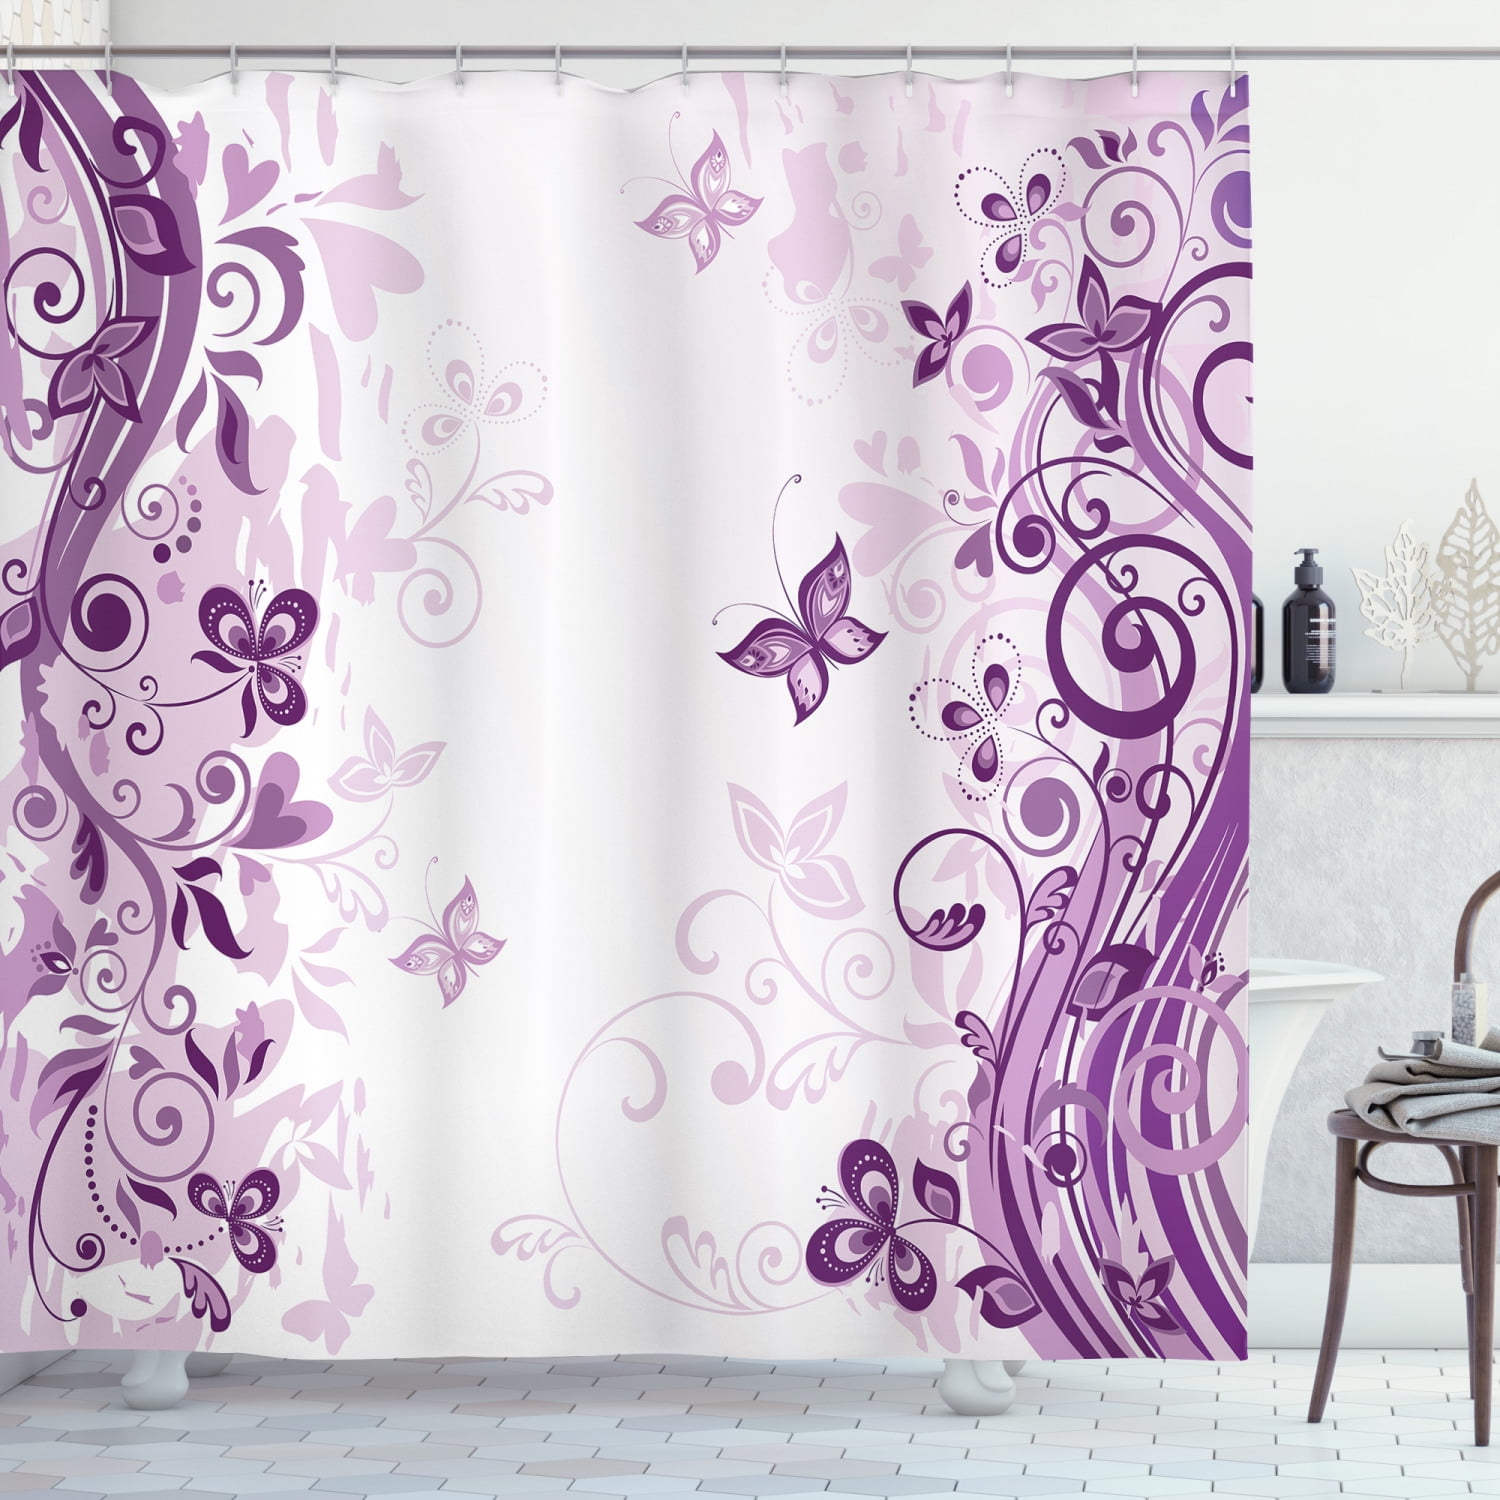 Details about   Purple Bloom Flowers Butterfly Painting Style Shower Curtain Set Bathroom Decor 